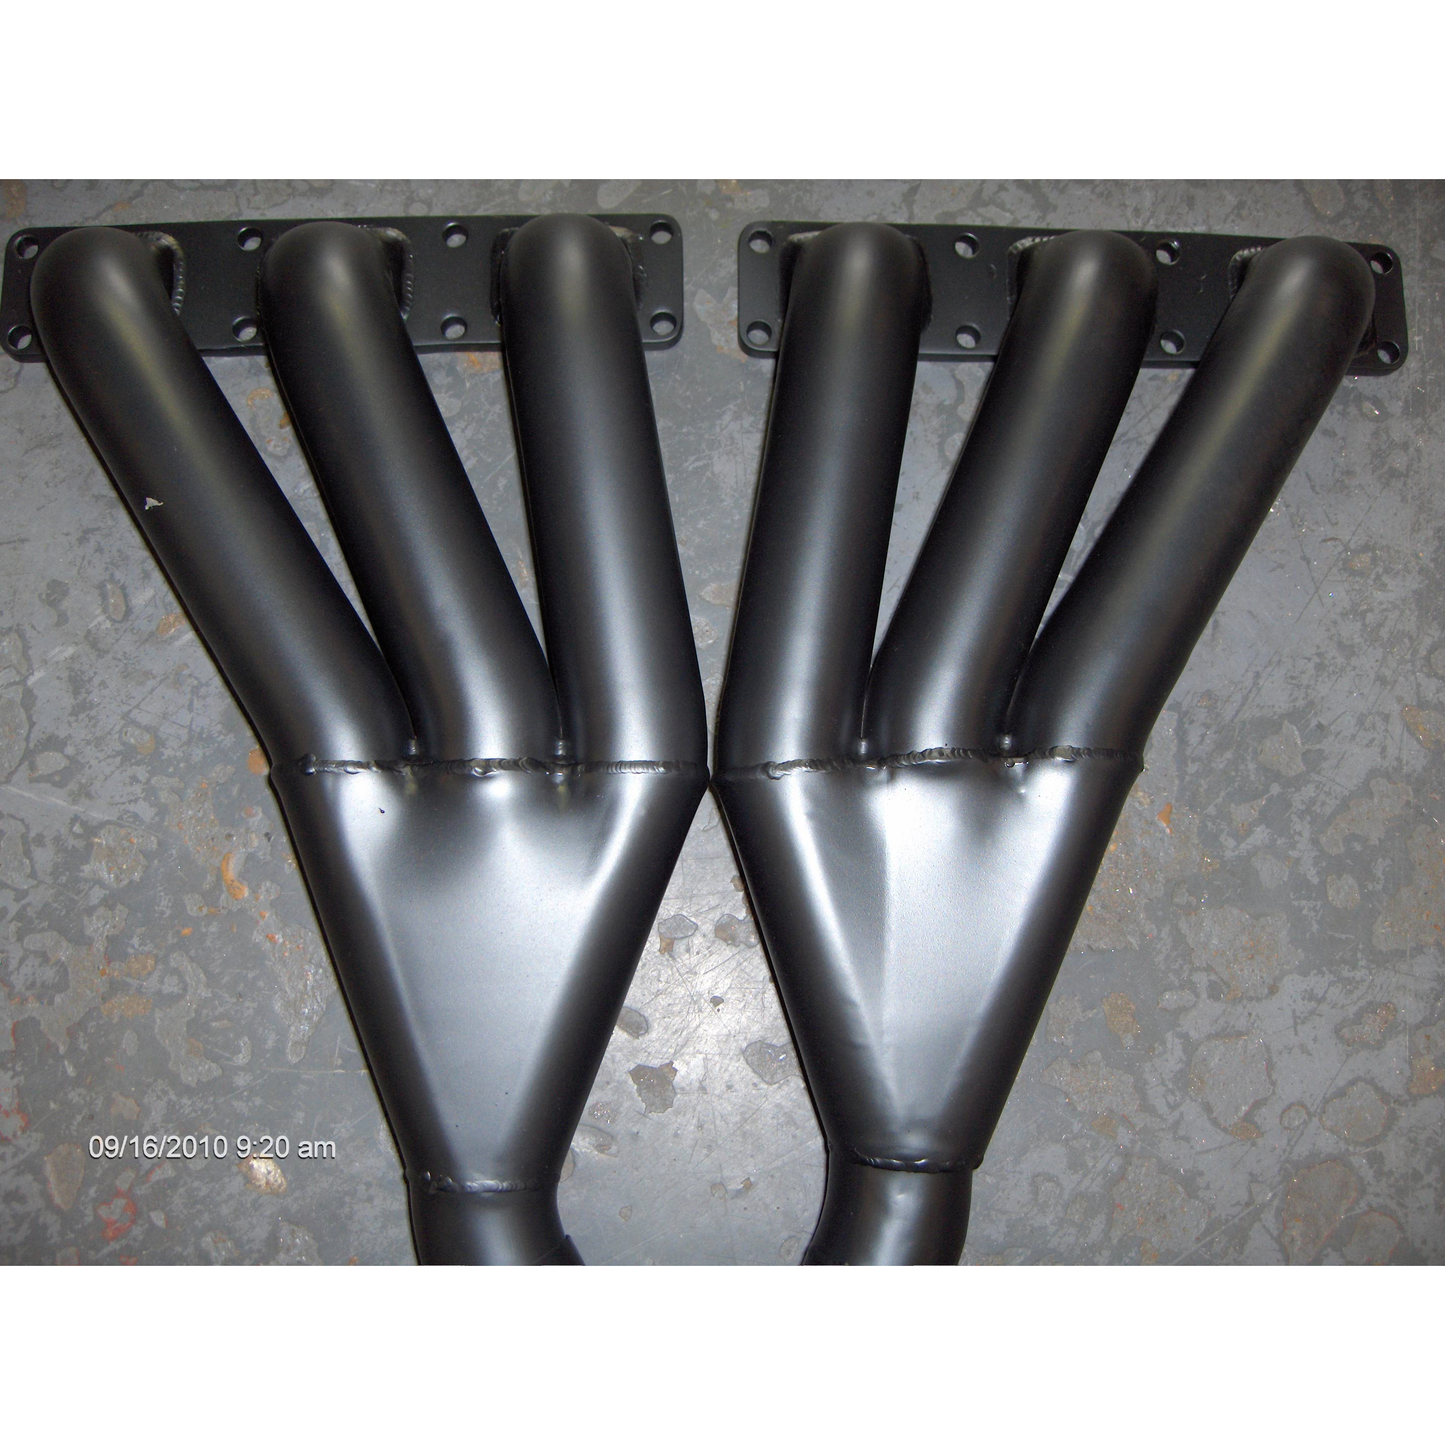 Jaguar XK120 Ceramic Coated Exhaust Manfolds for twin system